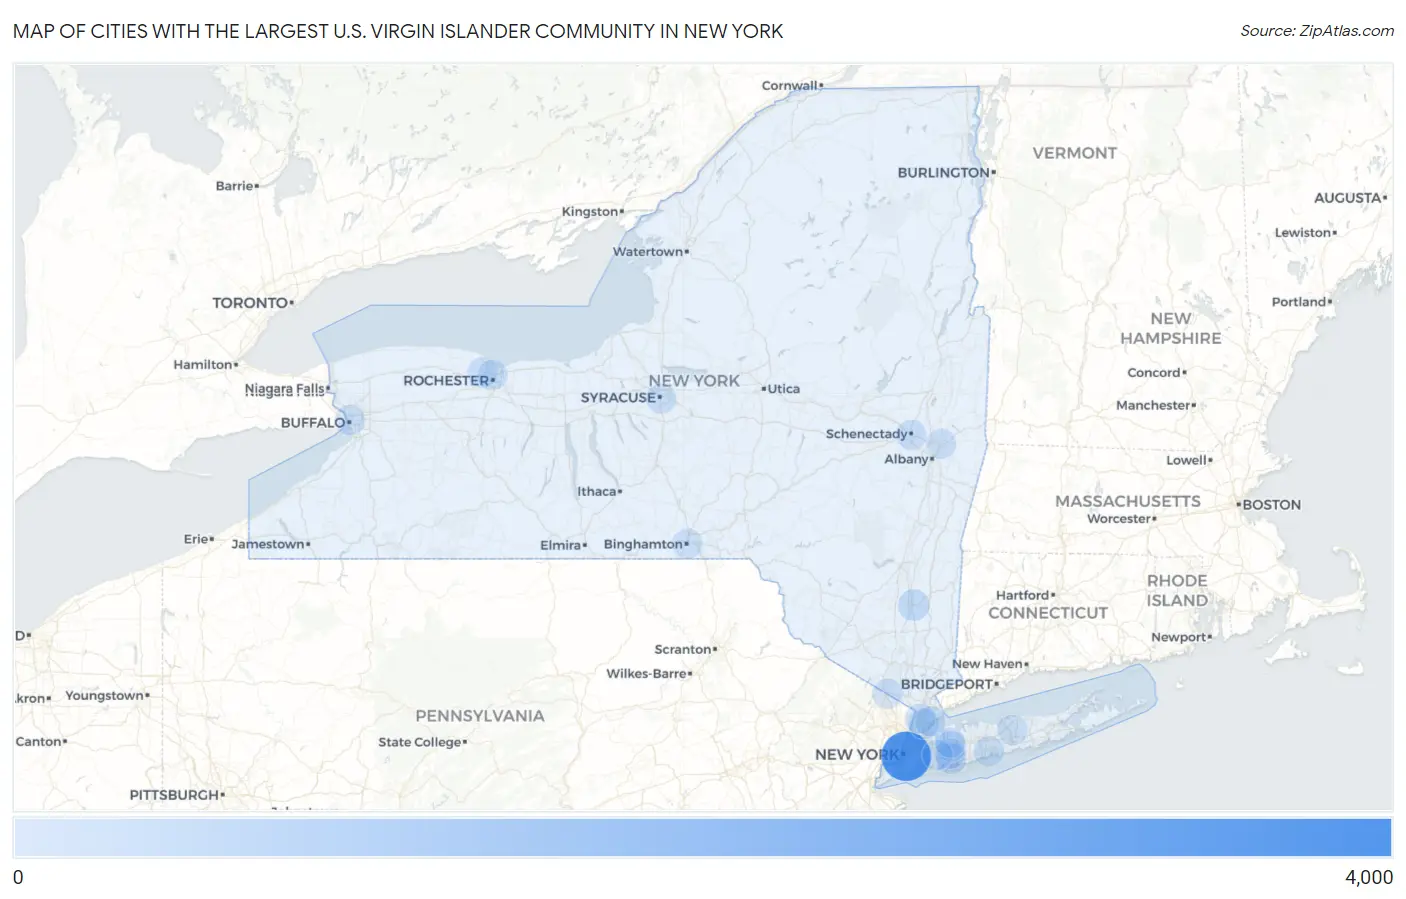 Cities with the Largest U.S. Virgin Islander Community in New York Map